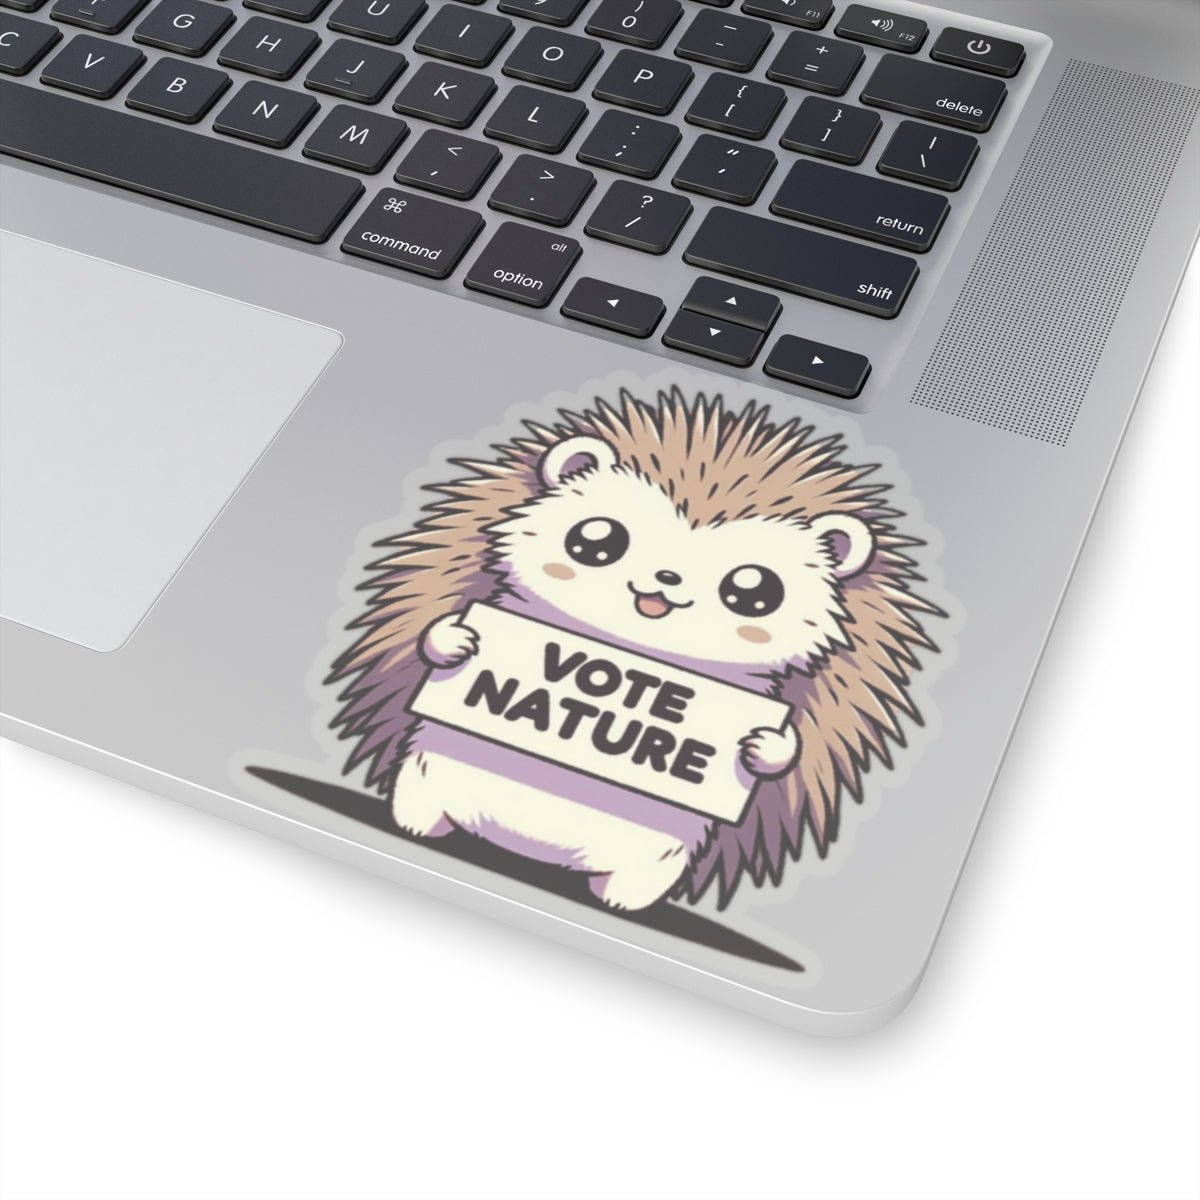 Inspirational Cute Porcupine Statement vinyl Sticker: Vote Nature! for laptop, kindle, phone, ipad, instrument case, notebook, mood board, or wall